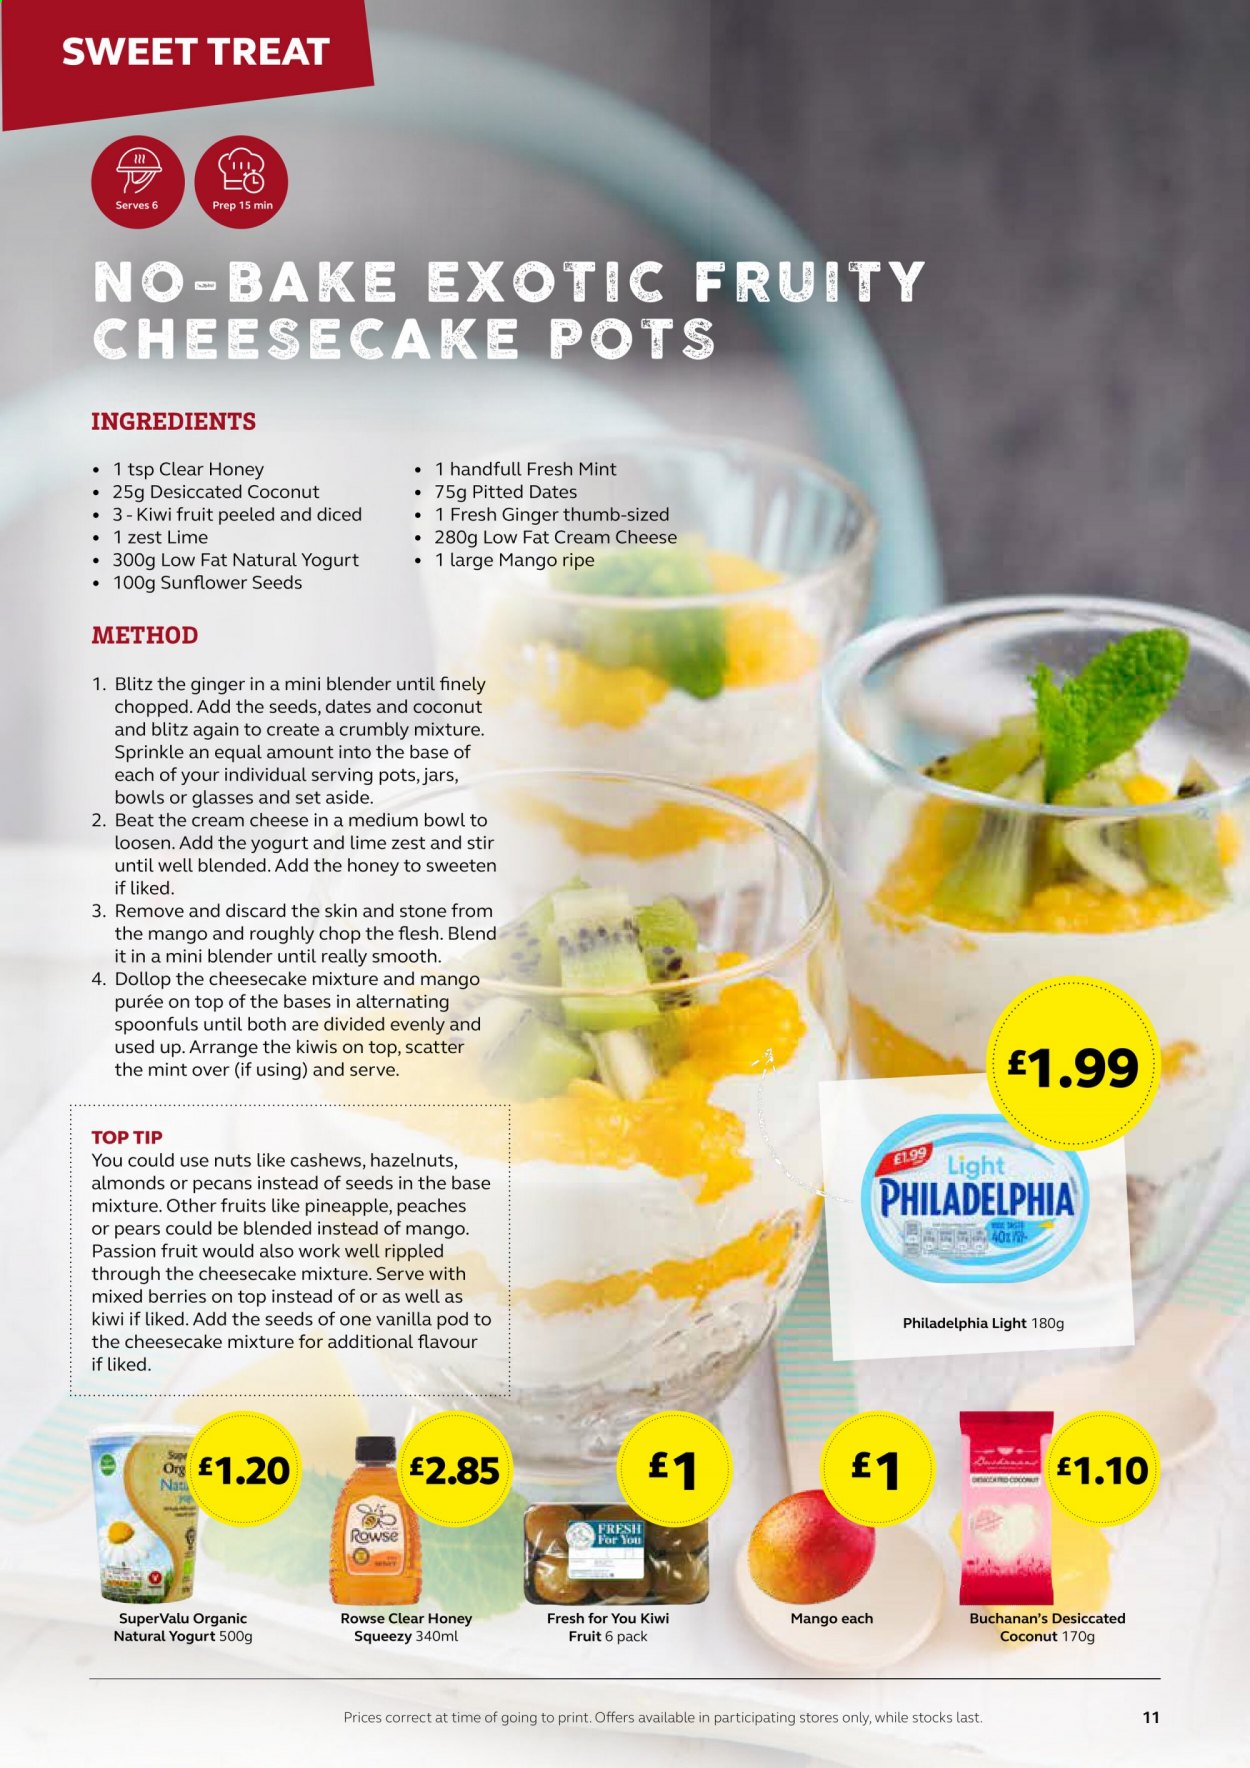 thumbnail - SuperValu offer  - Sales products - kiwi, pineapple, pears, coconut, peaches, cheesecake, Philadelphia, cheese, yoghurt, honey, almonds, cashews, hazelnuts, pecans, dried fruit, dried dates, sunflower seeds, pot, bowl, jar. Page 11.